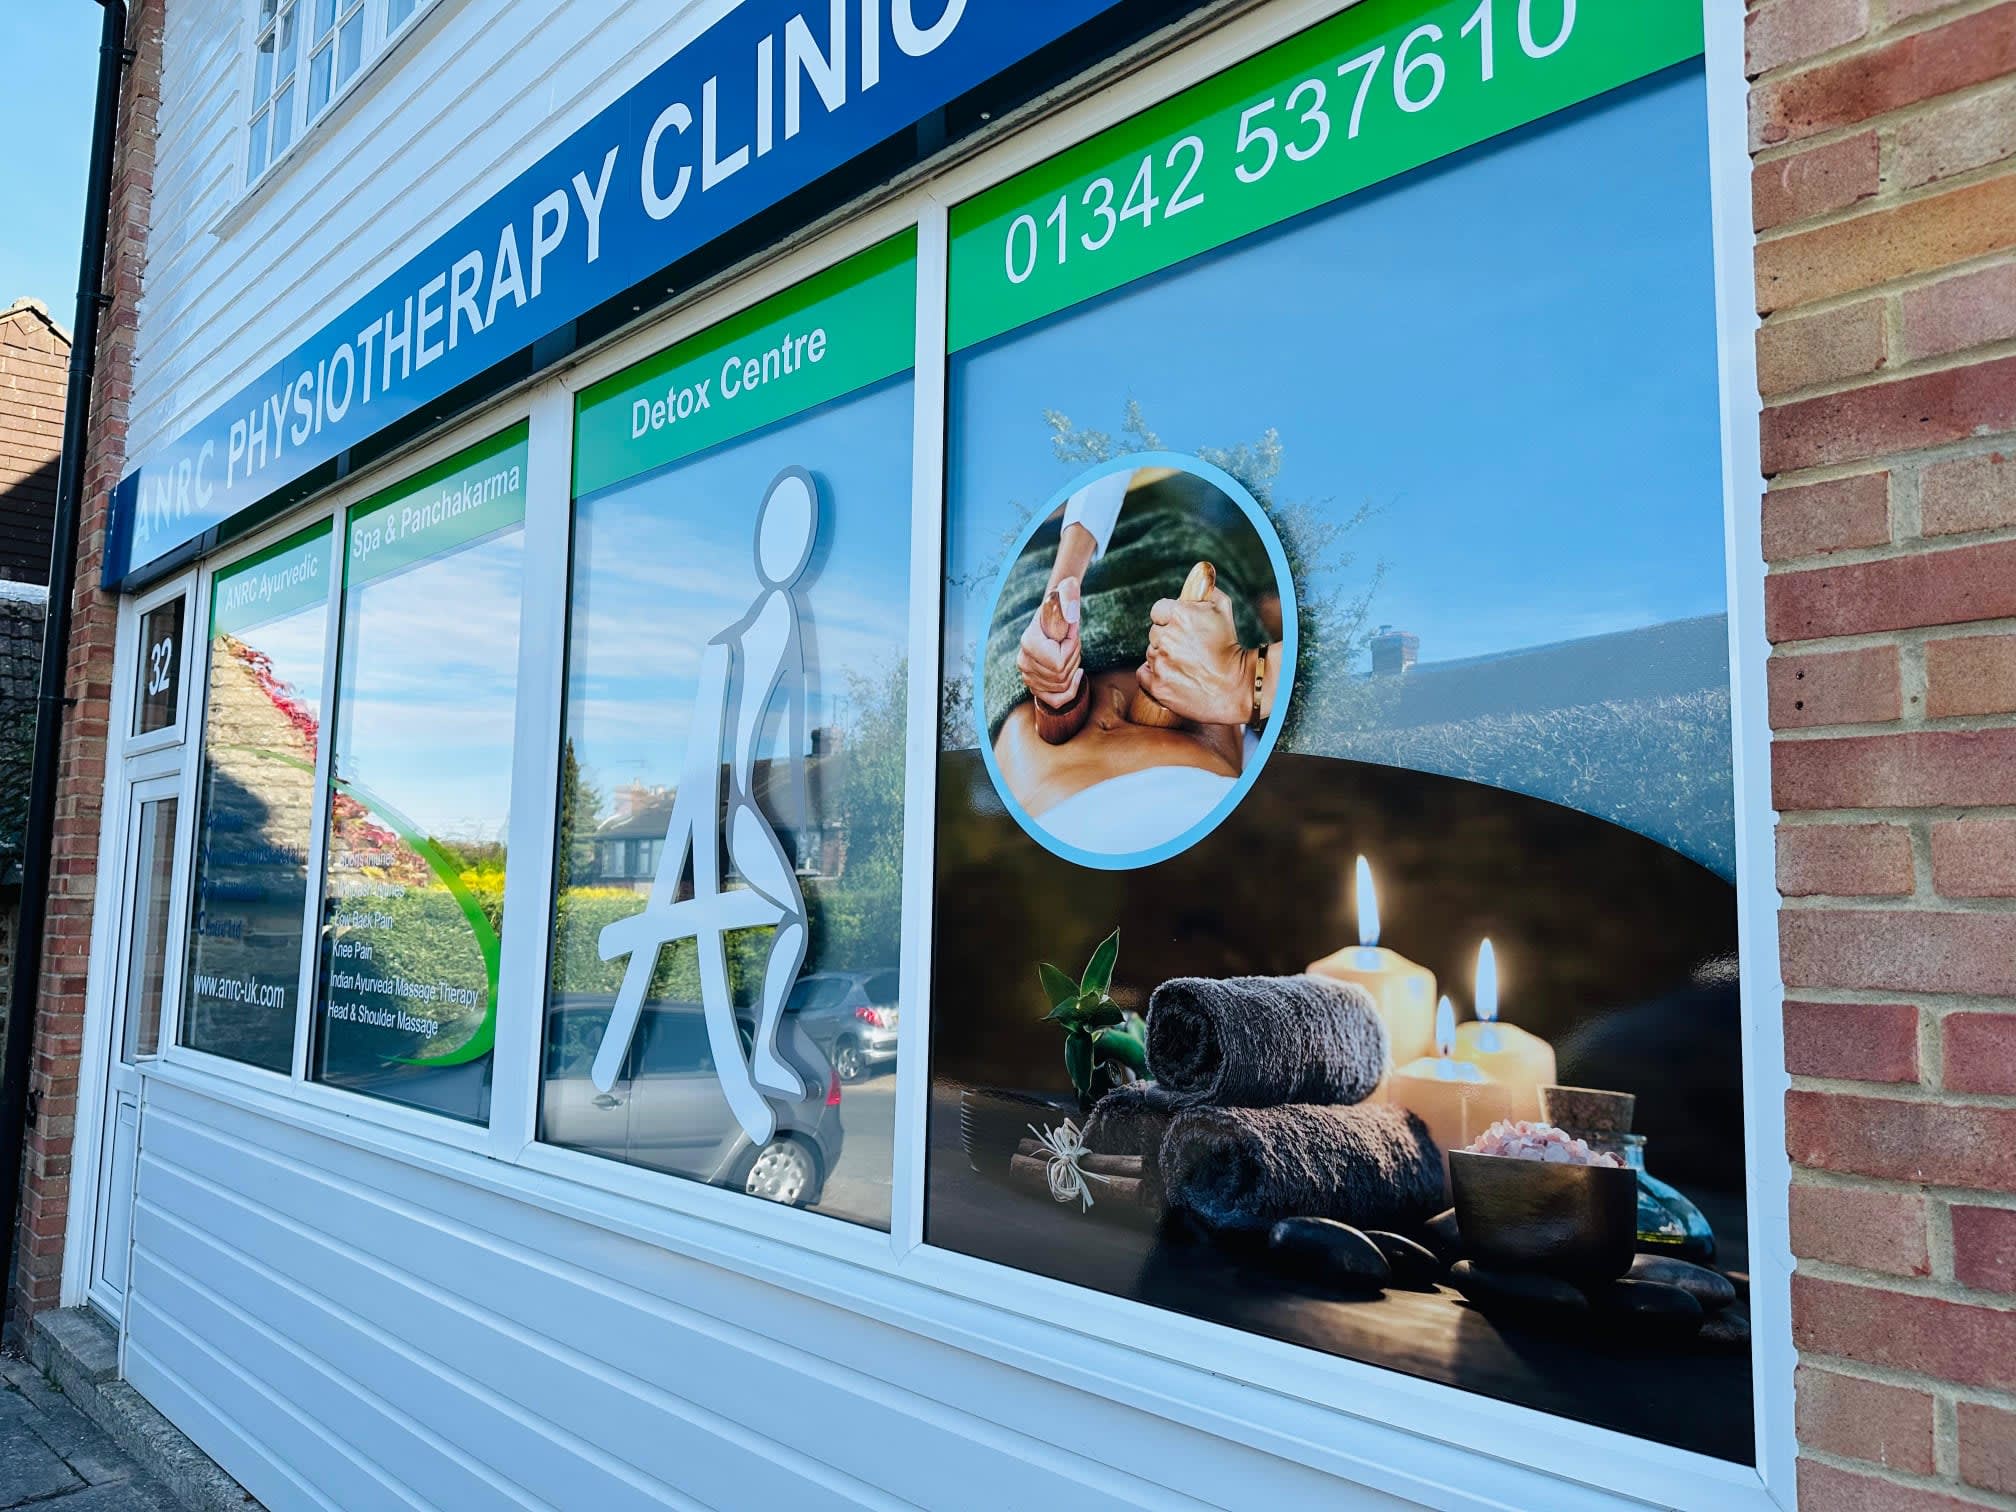 Images A N R C Physiotherapy Clinic